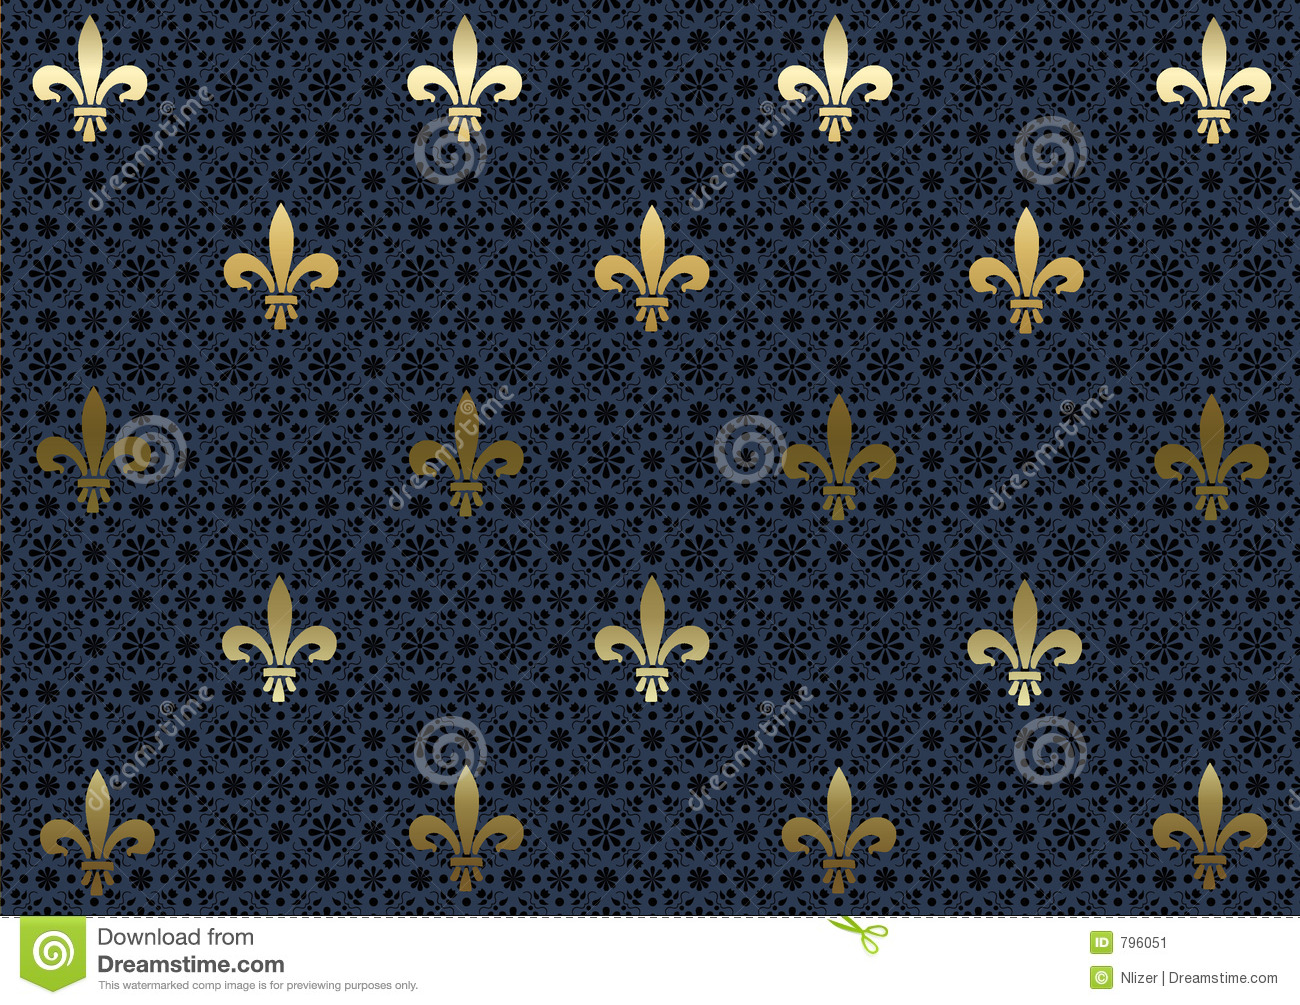  navy blue and gold wallpaper blue and gold wallpaper navy blue 1300x1005